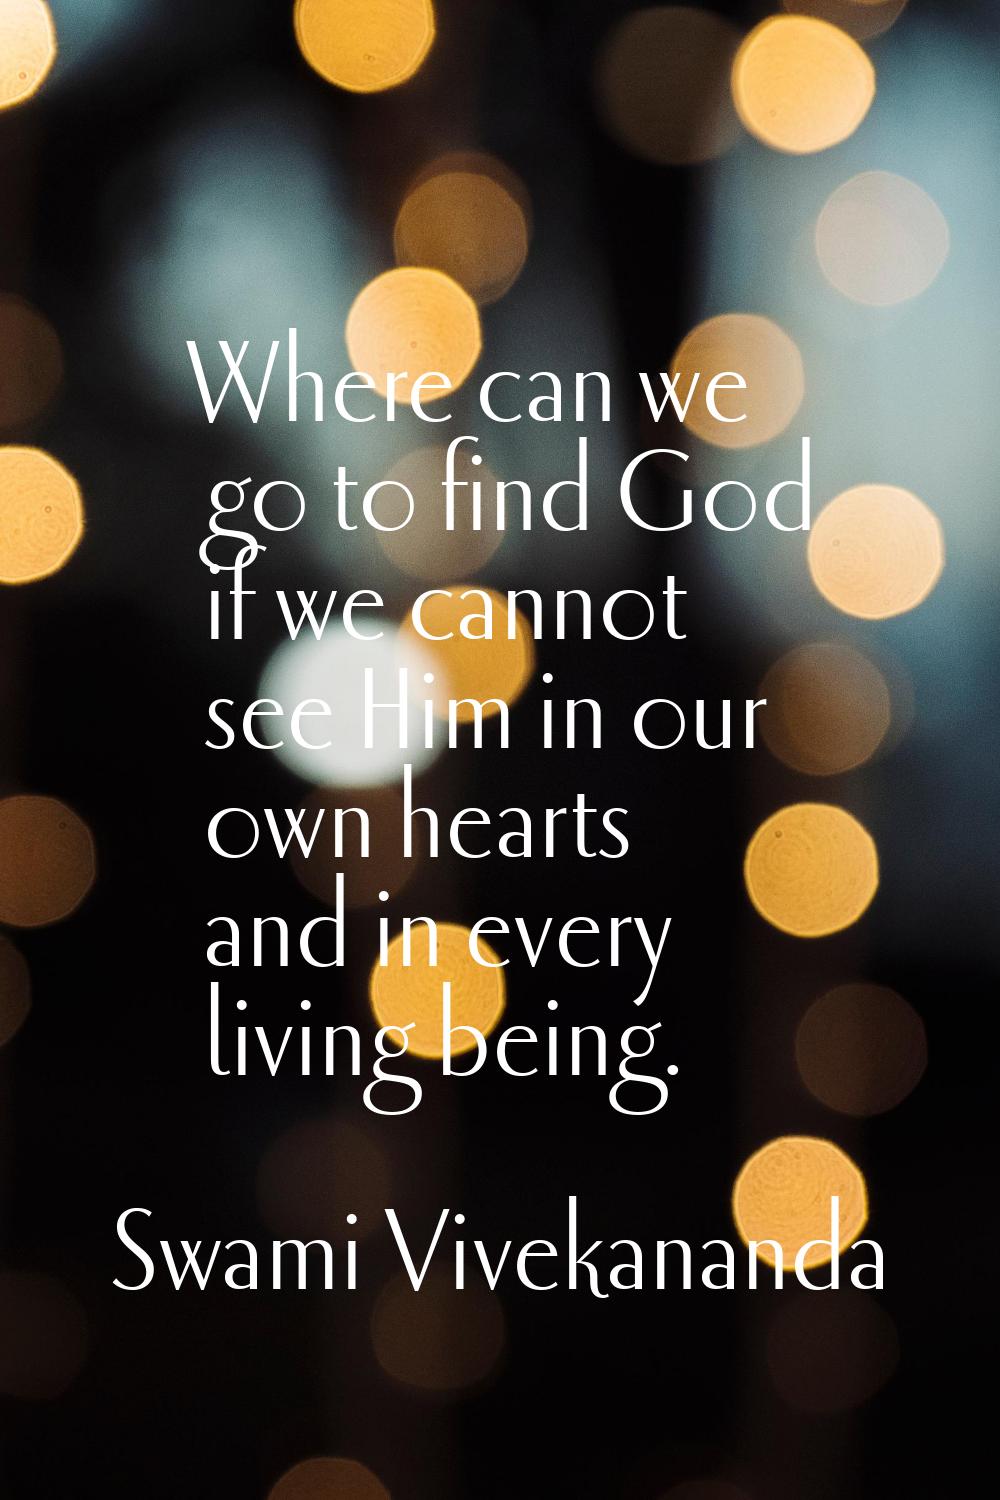 Where can we go to find God if we cannot see Him in our own hearts and in every living being.